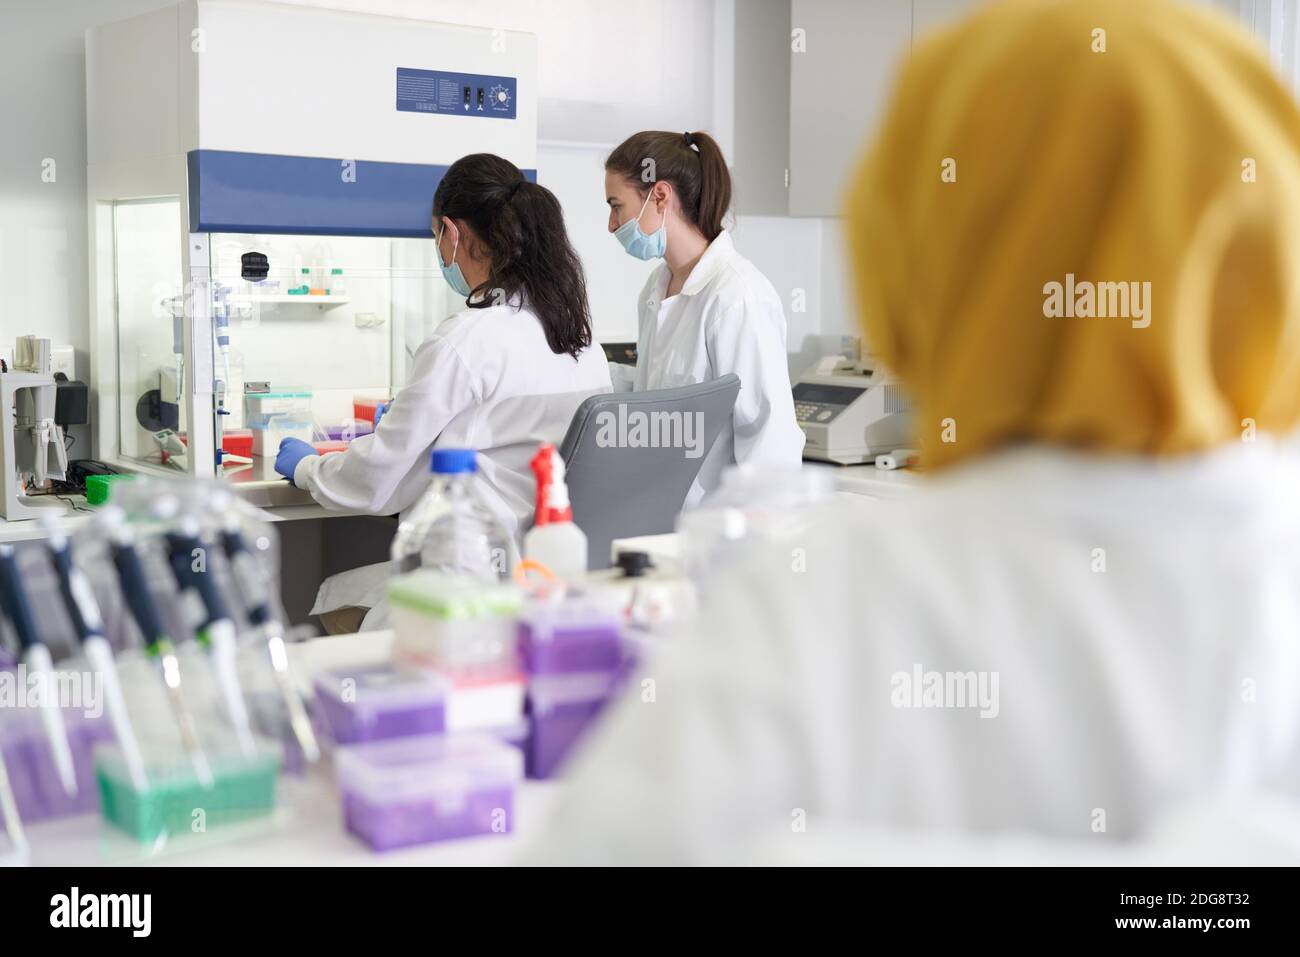 Female scientists working at fume hood in laboratory Stock Photo